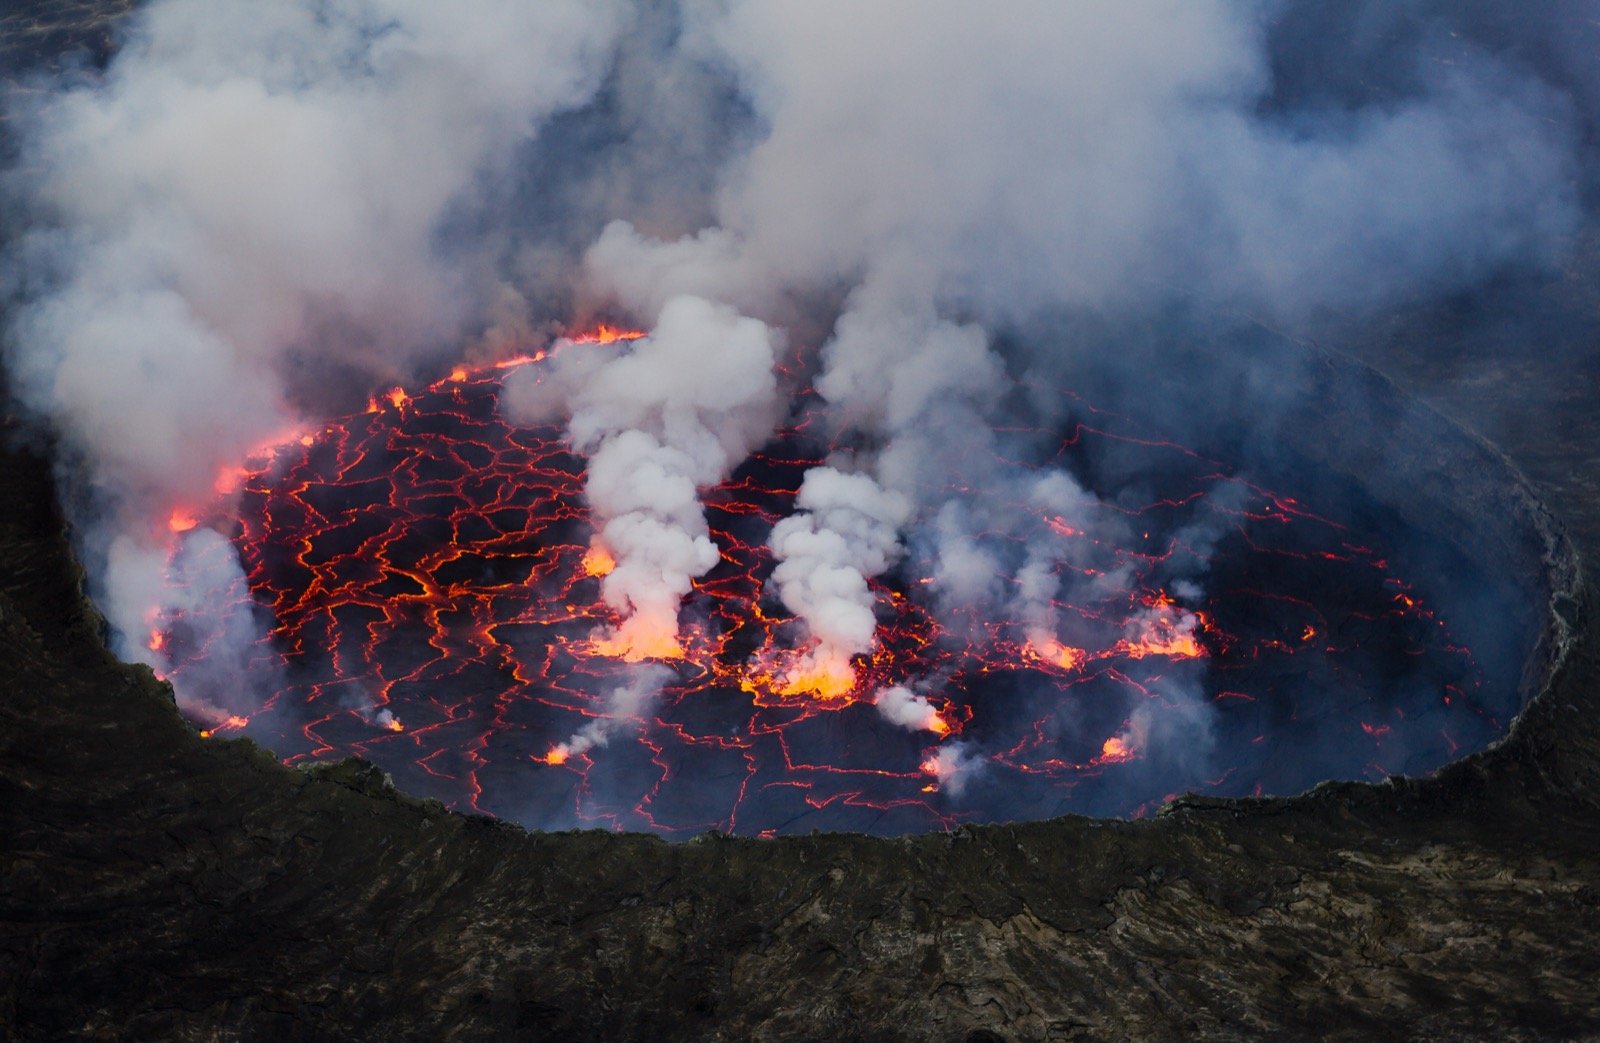 Can You Pass This 40-Question Geography Test That Gets Progressively Harder With Each Question? Mount Nyiragongo, Democratic Republic Of The Congo, volcano volcanic